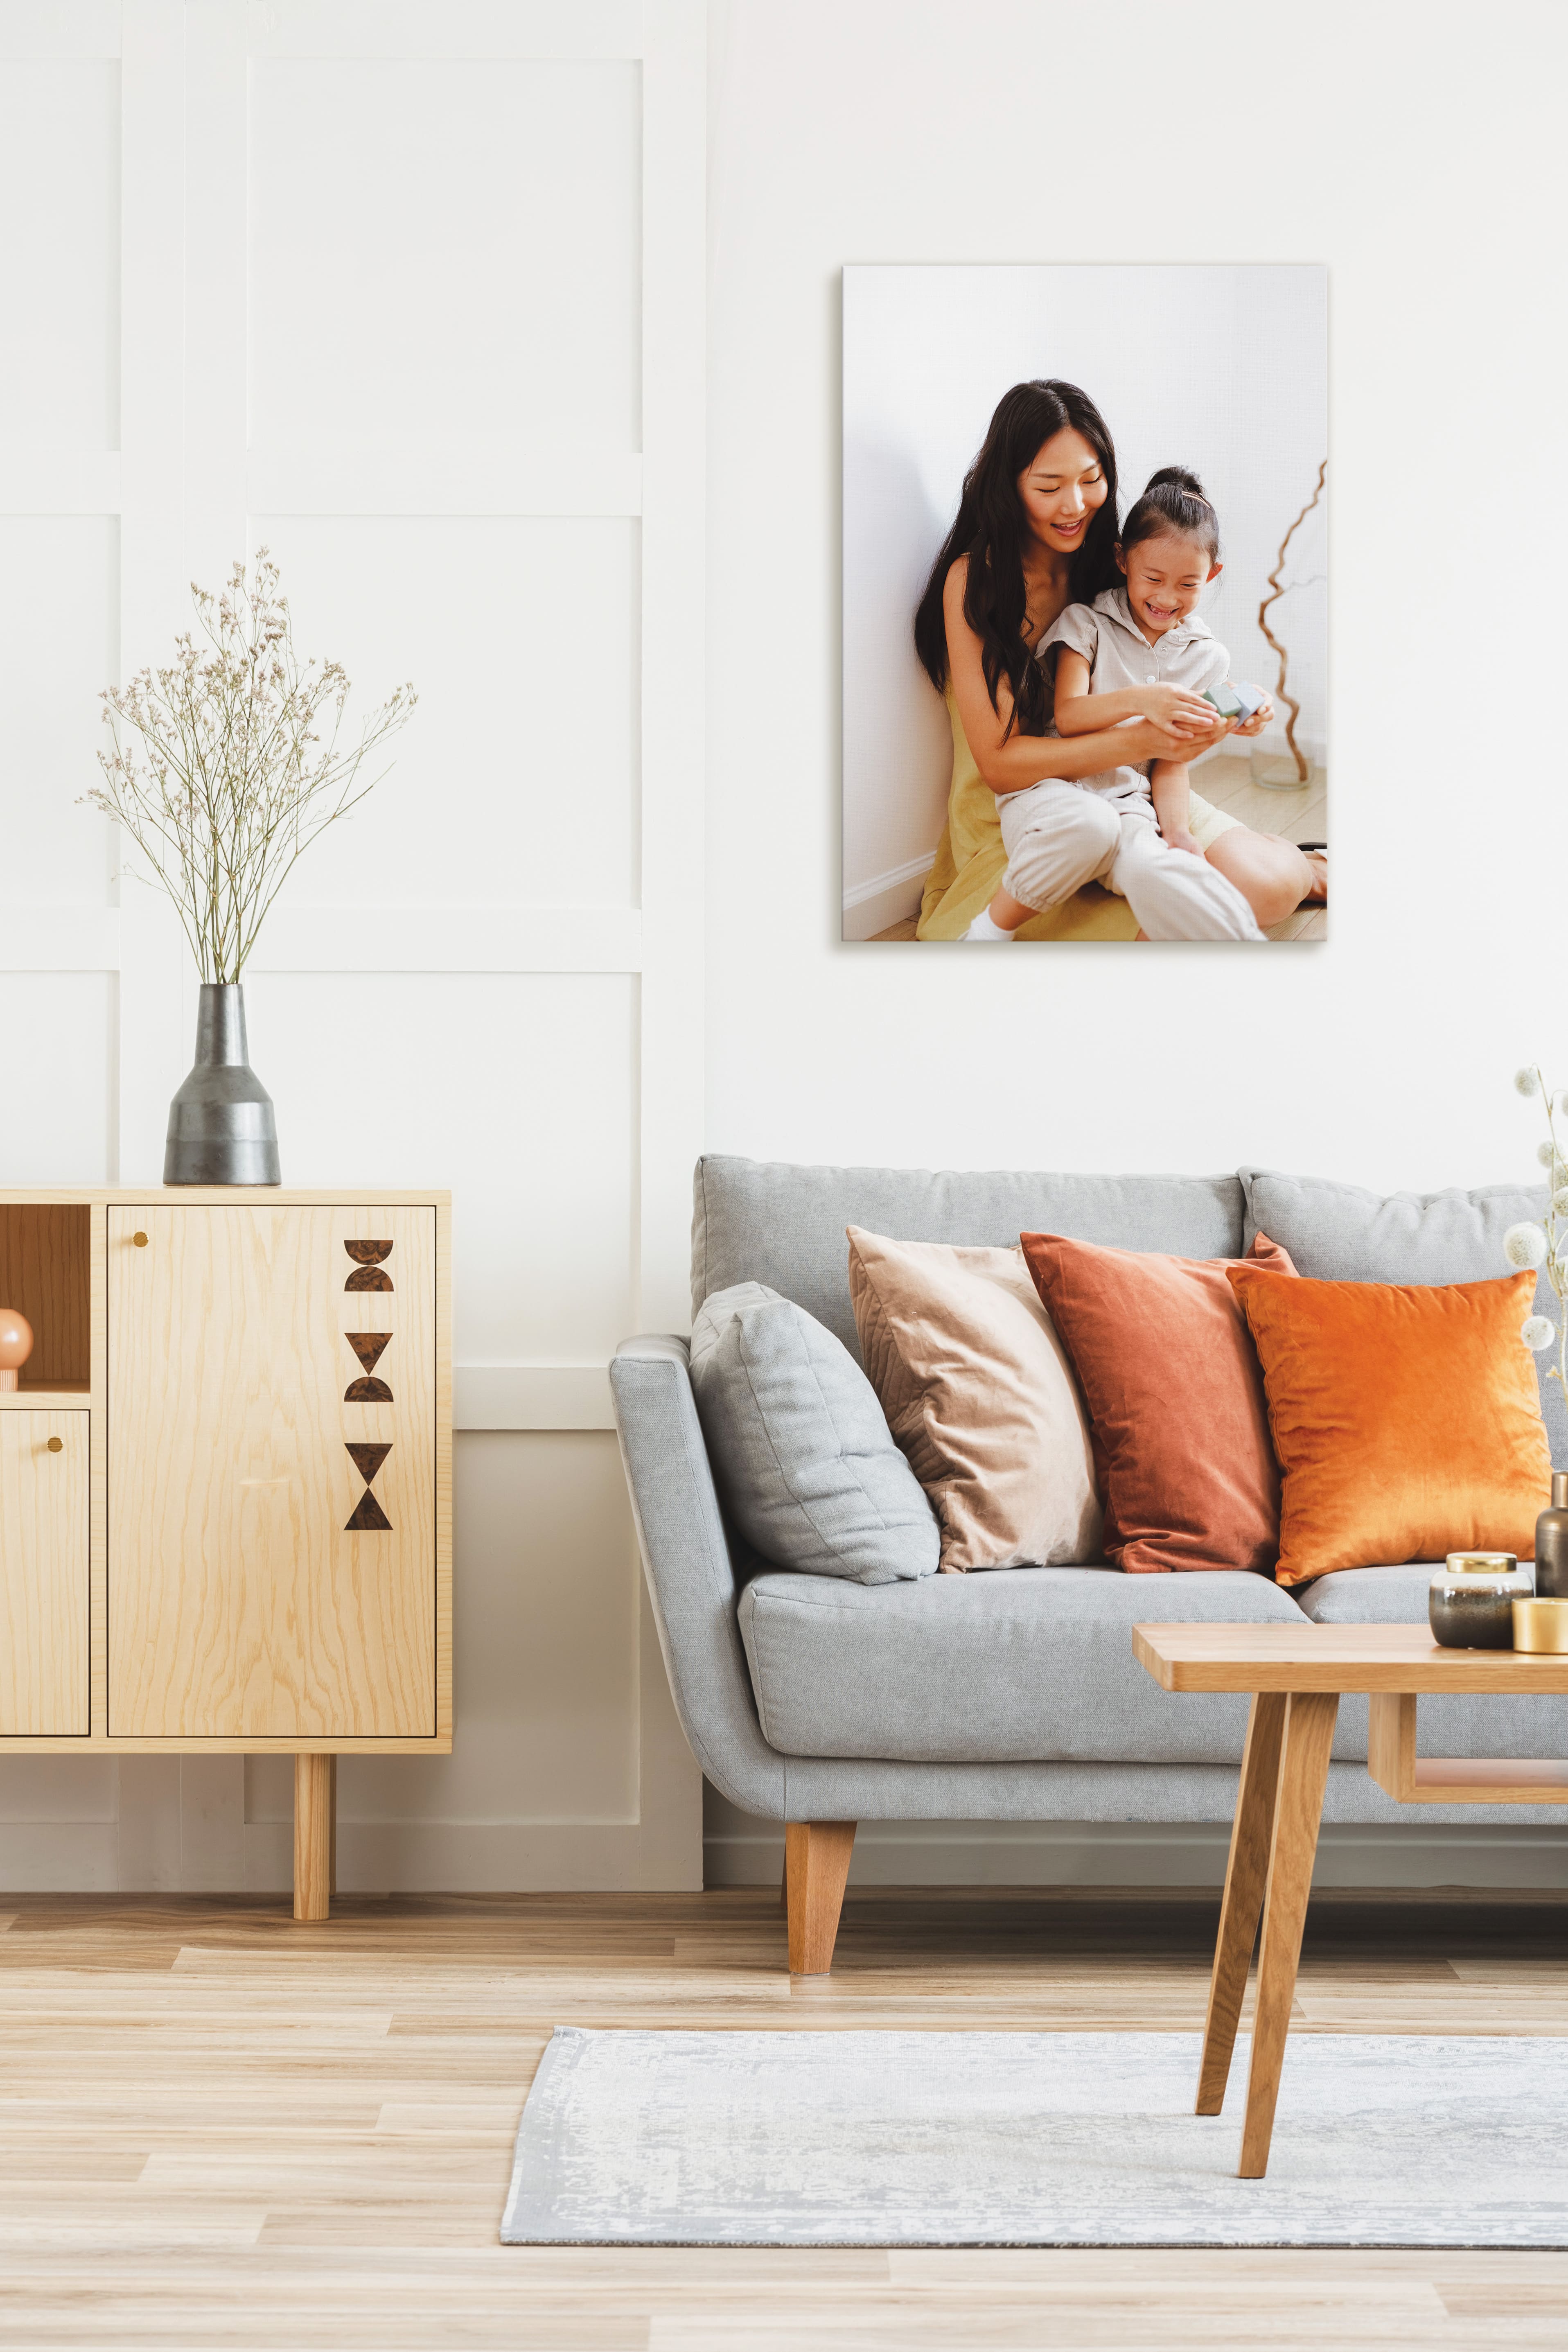 Canvas print in living room of mother and daughter.